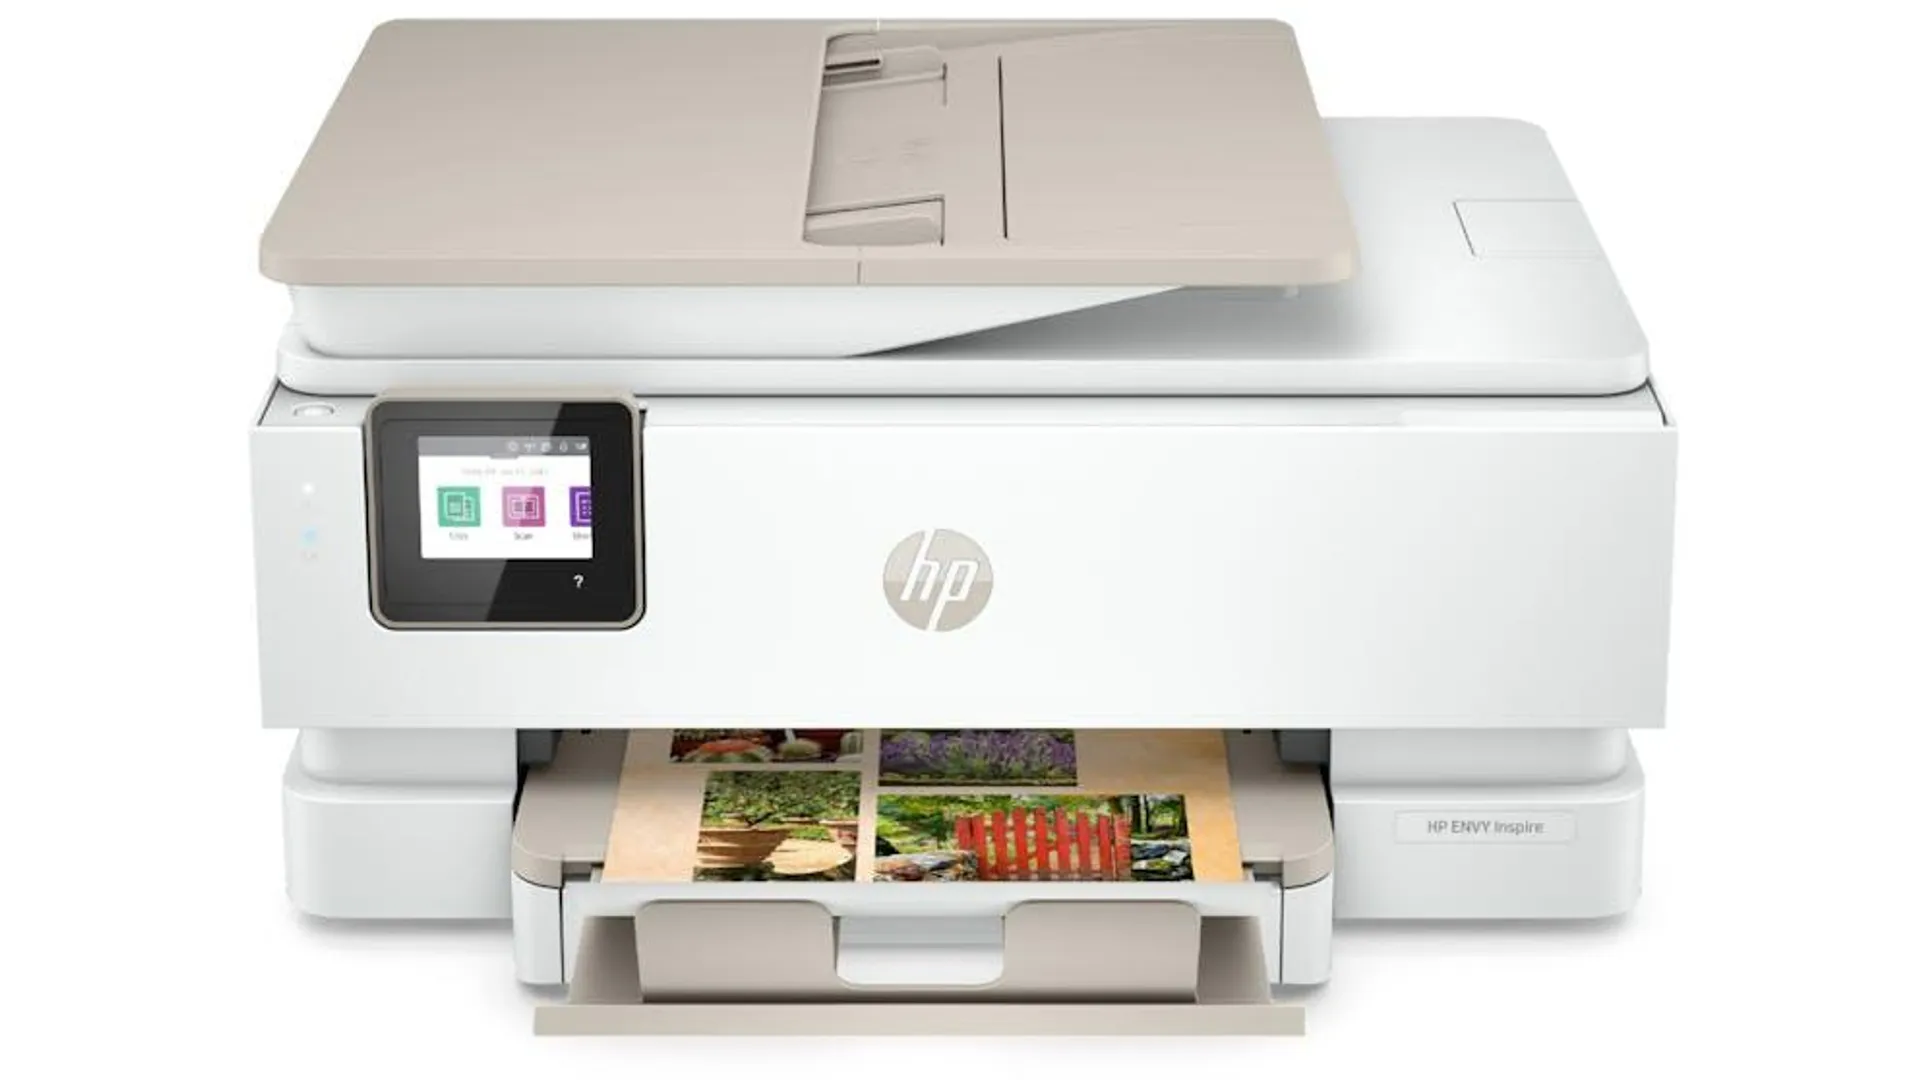 HP Envy Inspire 7920e All-in-One Printer with 6-Months of Instant Ink through HP+